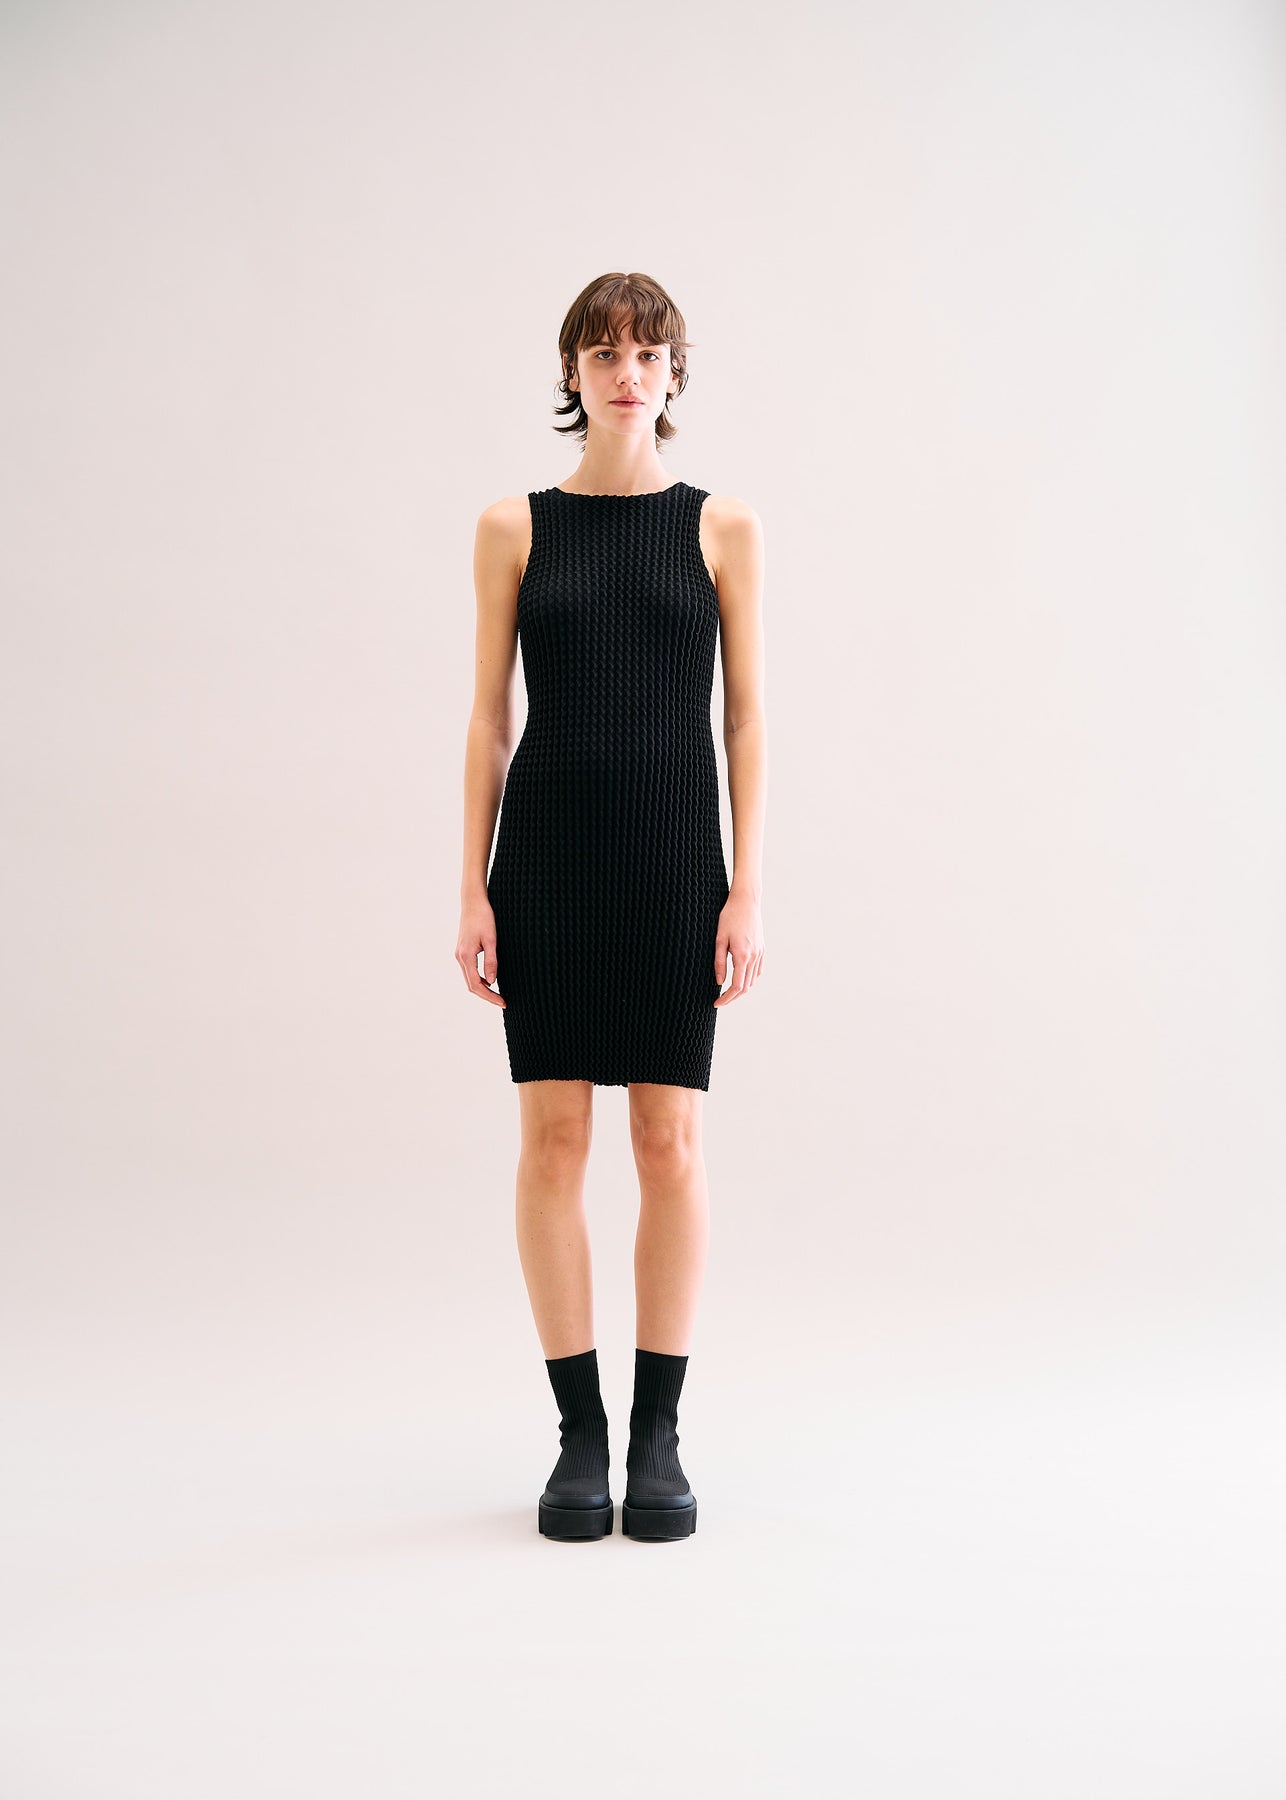 SPONGY BK/WT-38 DRESS | The official ISSEY MIYAKE ONLINE STORE ...